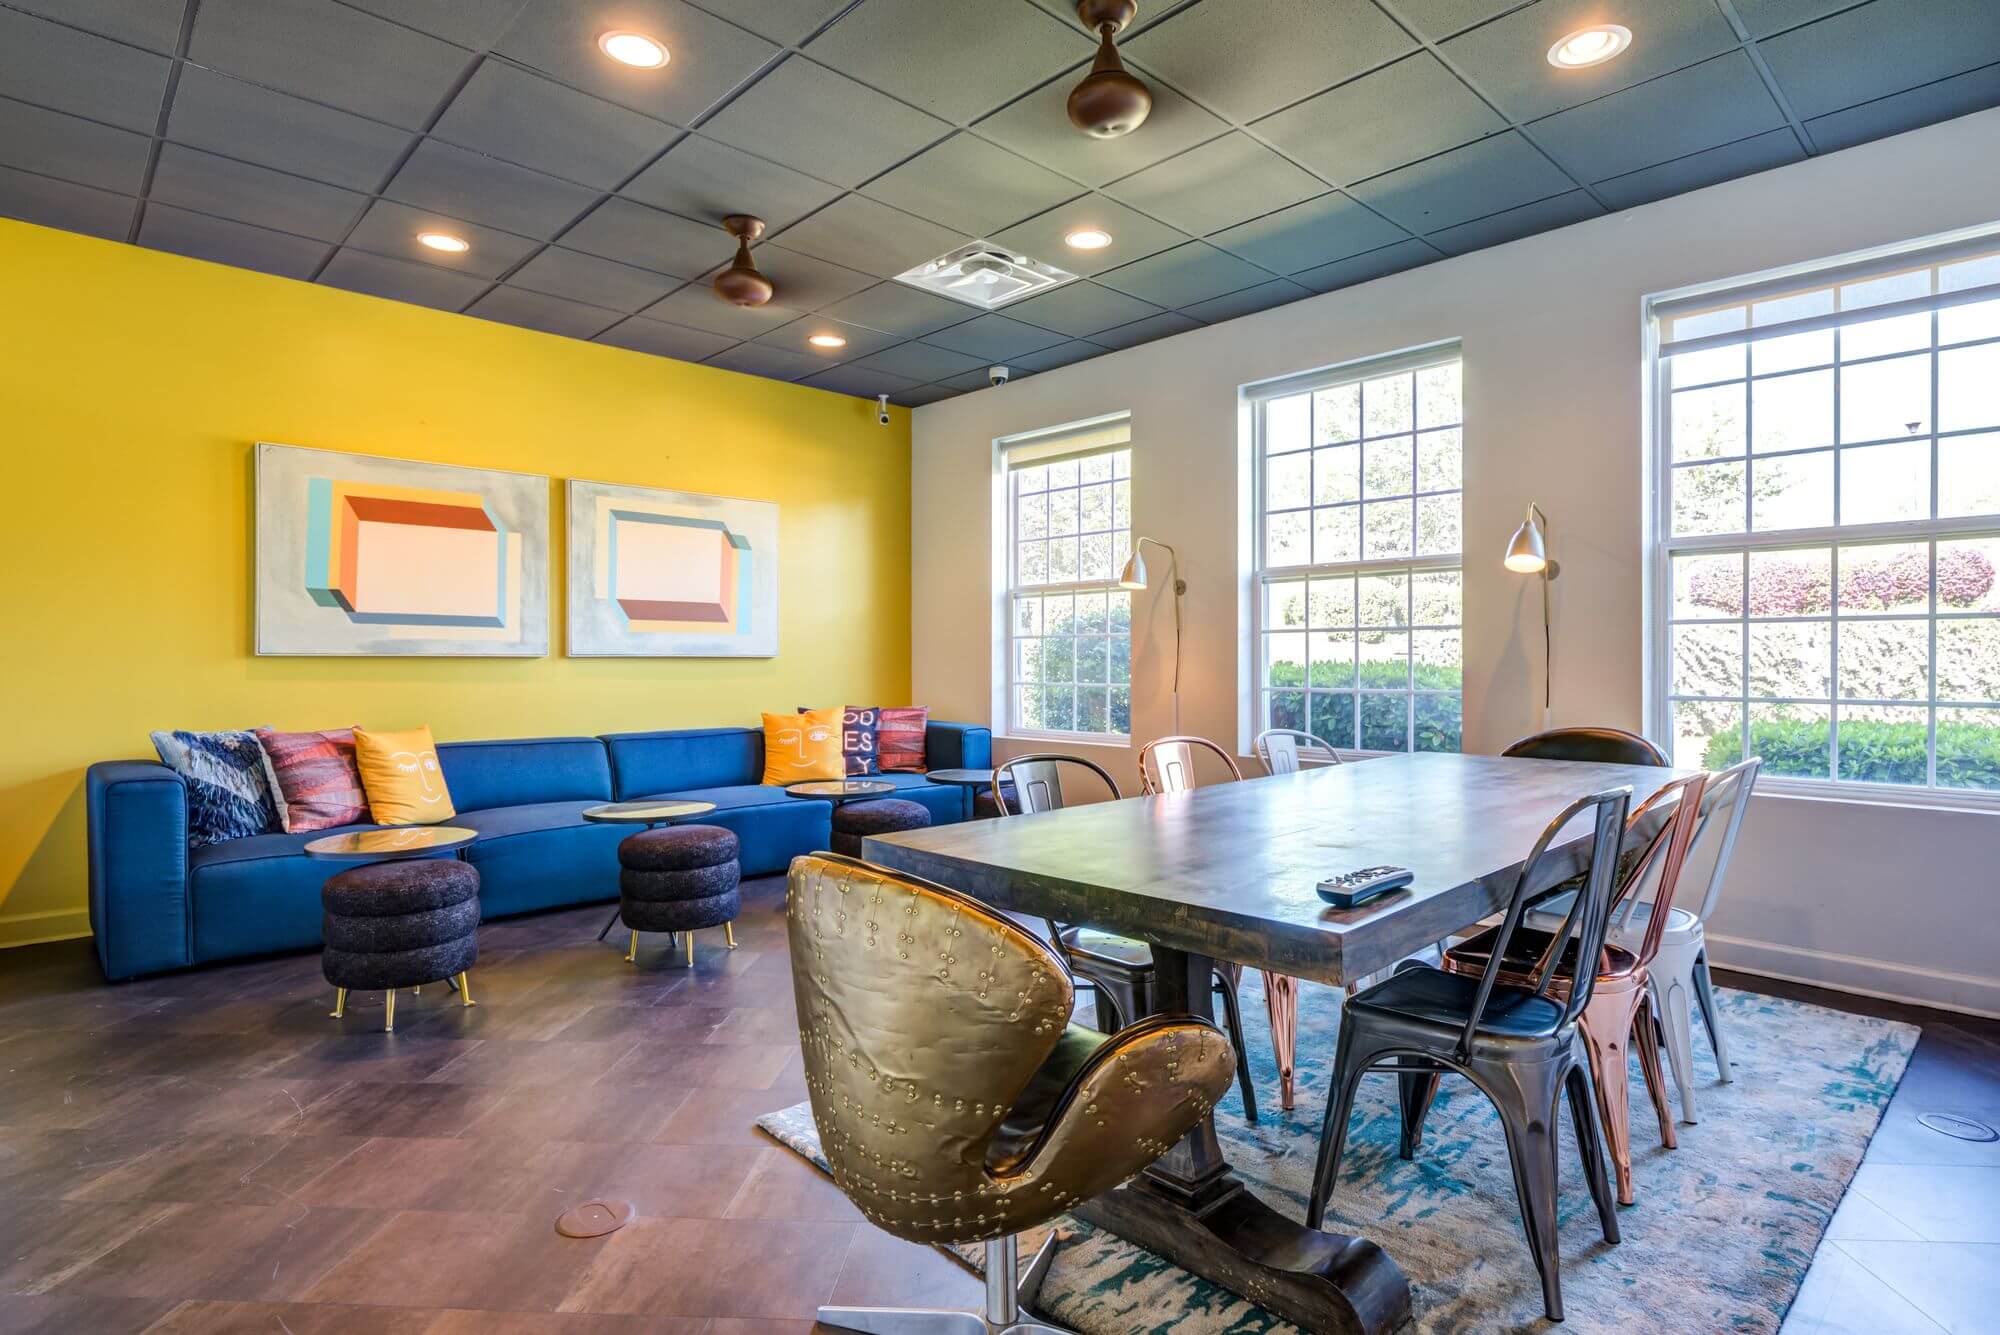 university village at clemson off campus apartments and townhomes near clemson university resident clubhouse study lounge seating